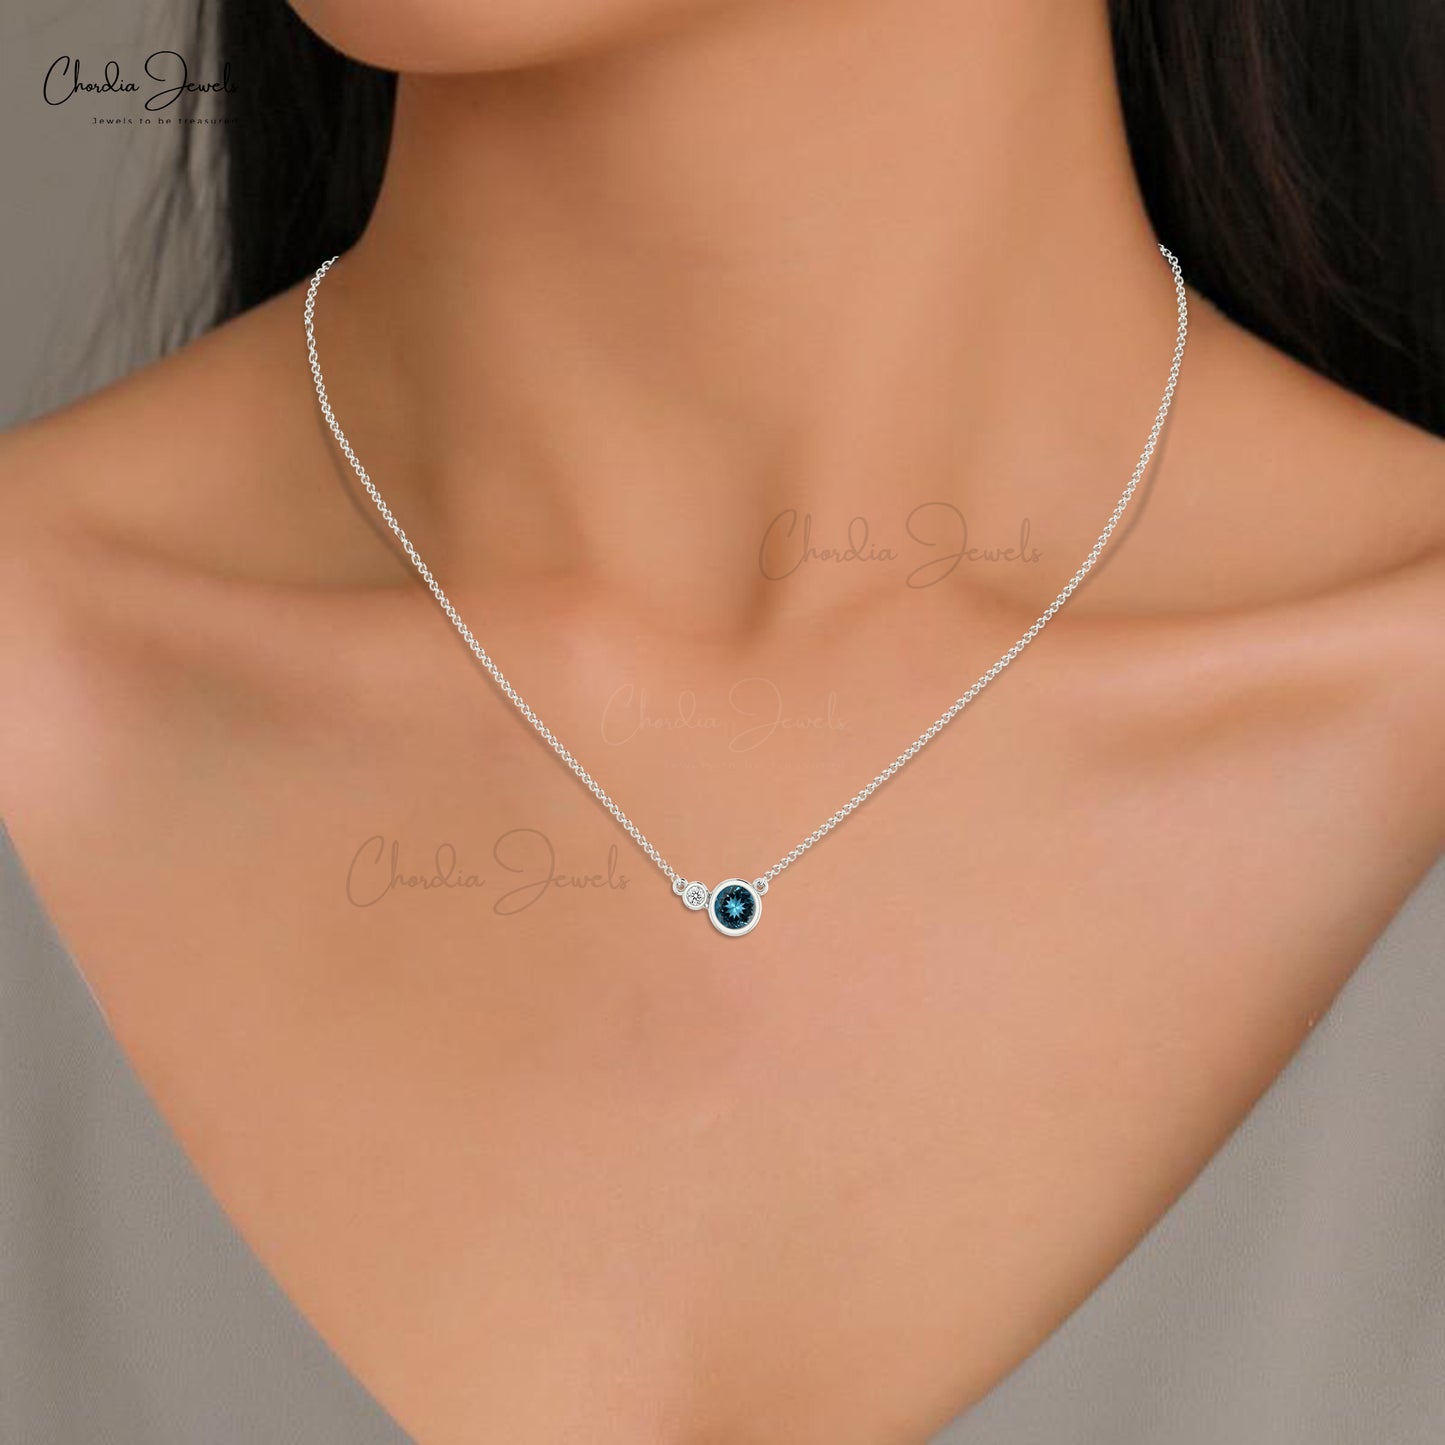 Load image into Gallery viewer, Natural London Blue Topaz Necklace, 5mm Round Faceted Gemstone Necklace, 14k Solid Gold Diamond Necklace Gift for Her
